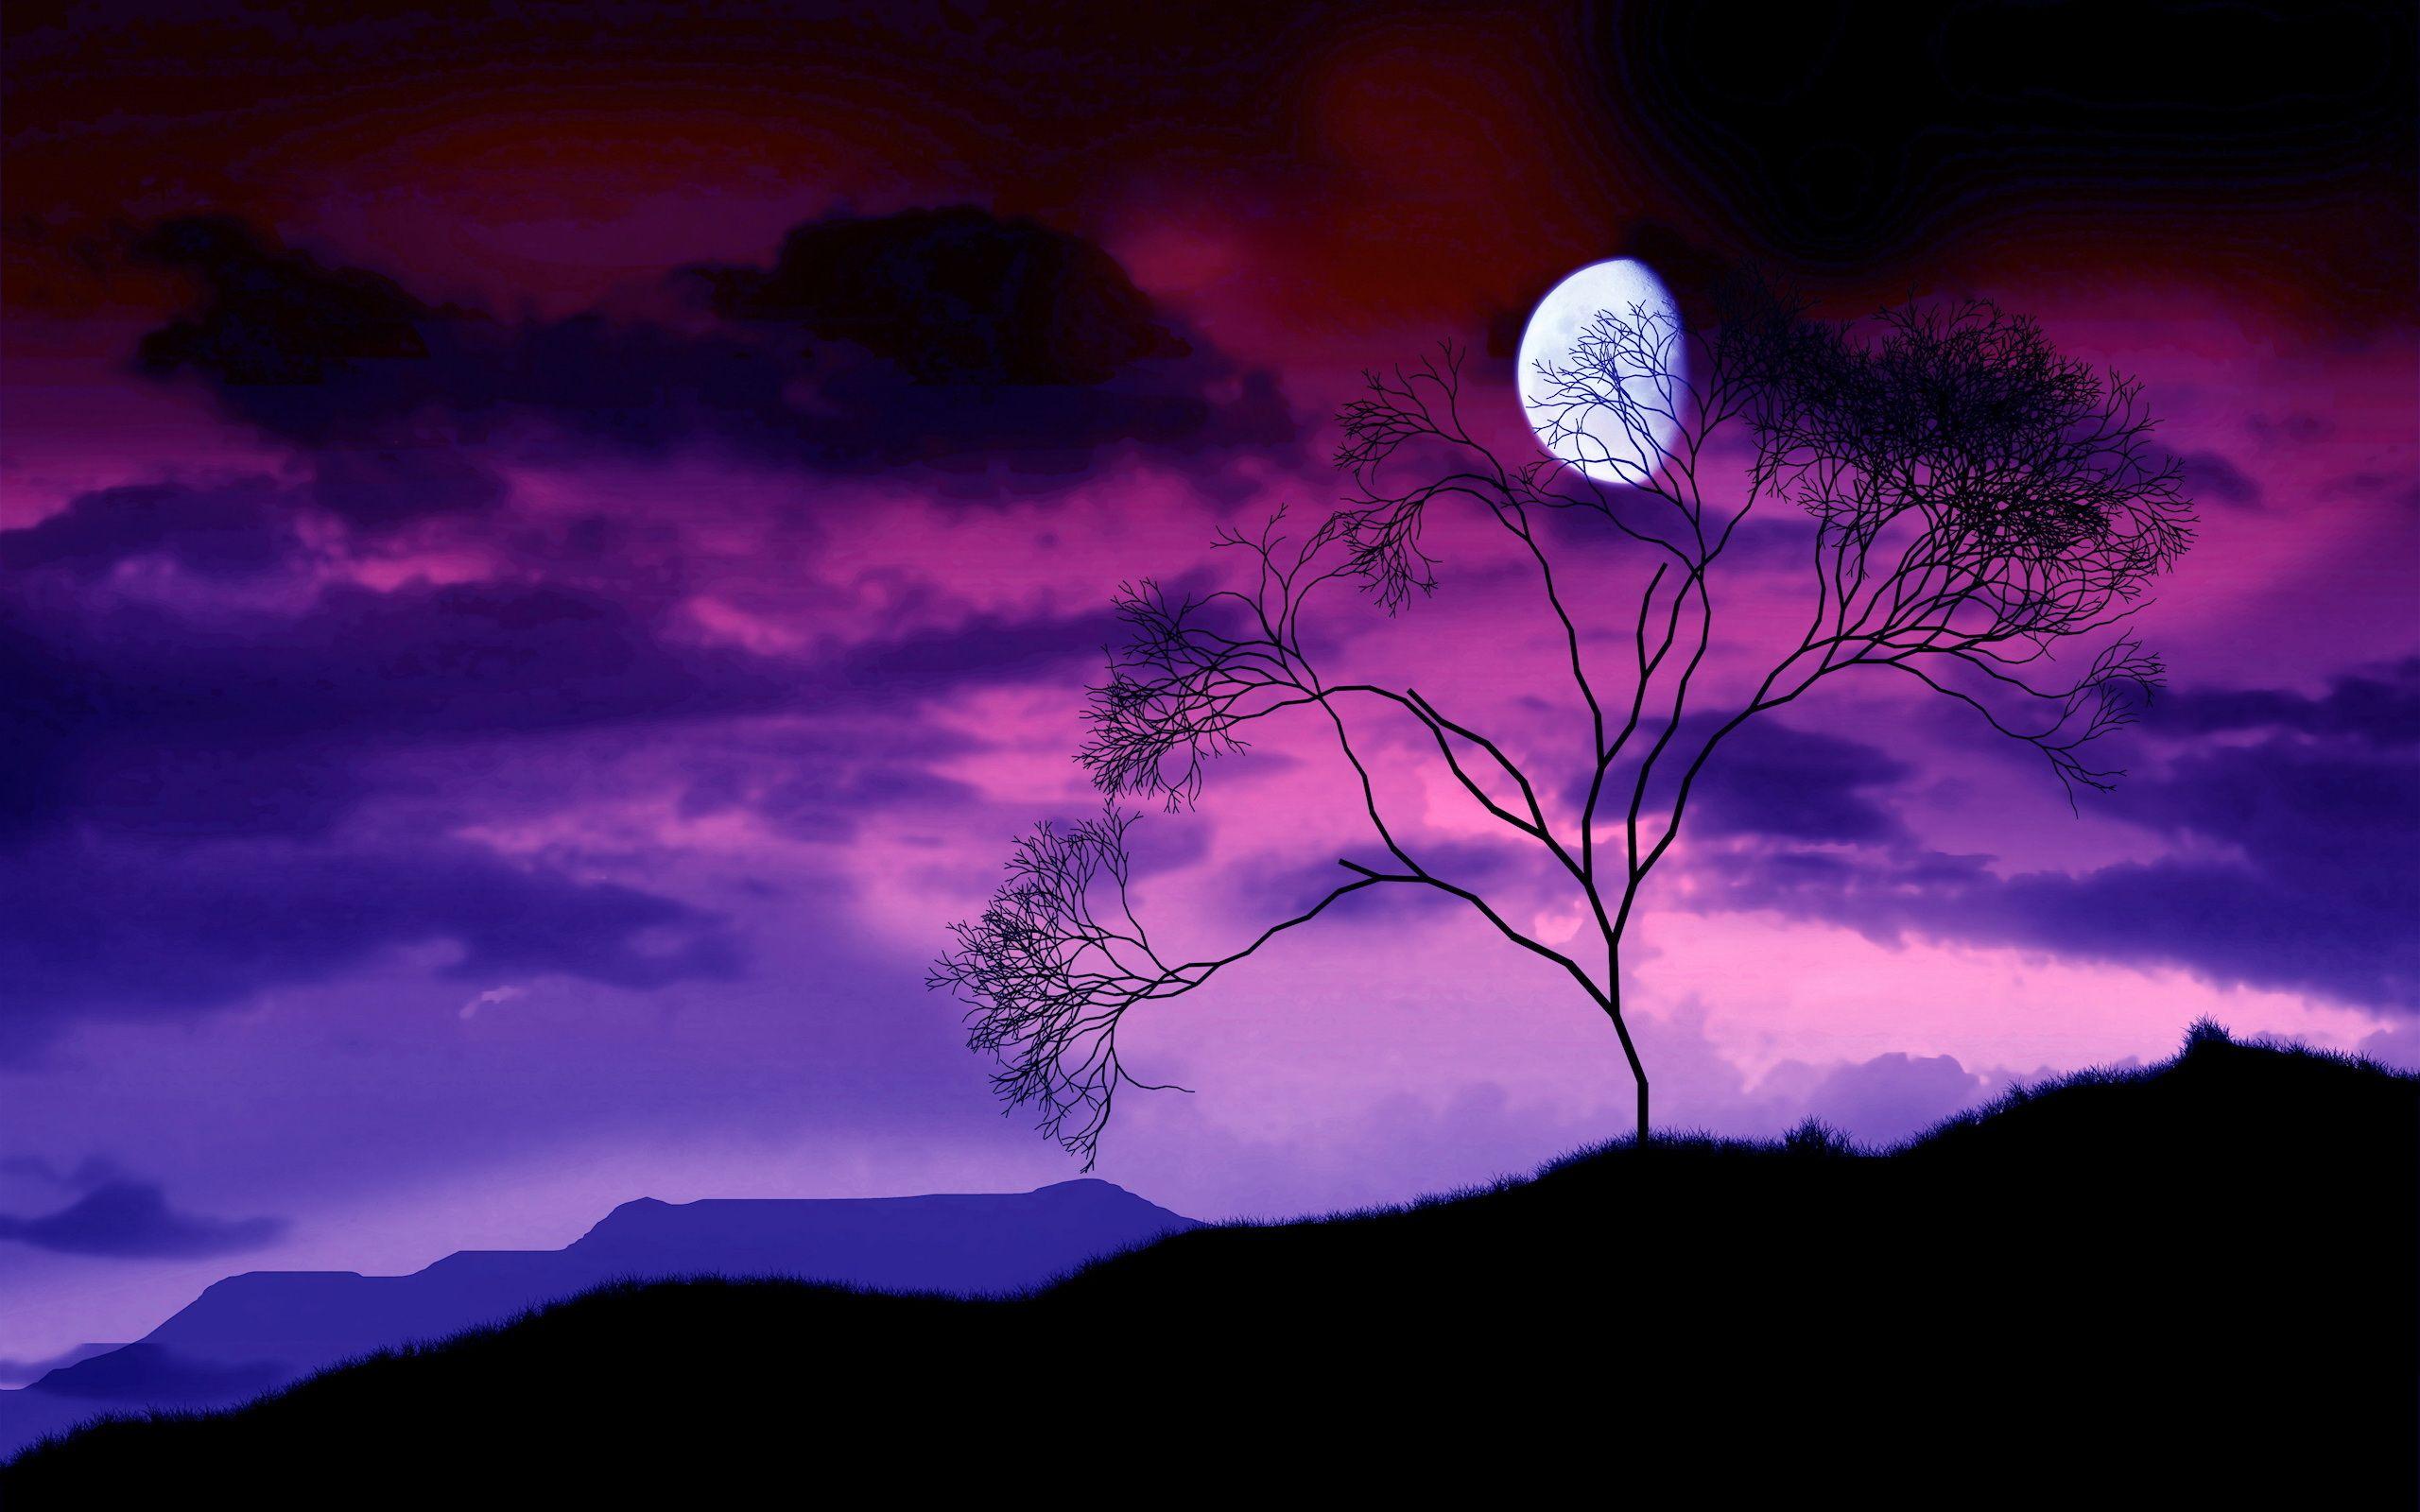 Artistic night scene of a gibbous moon in a sky with purple